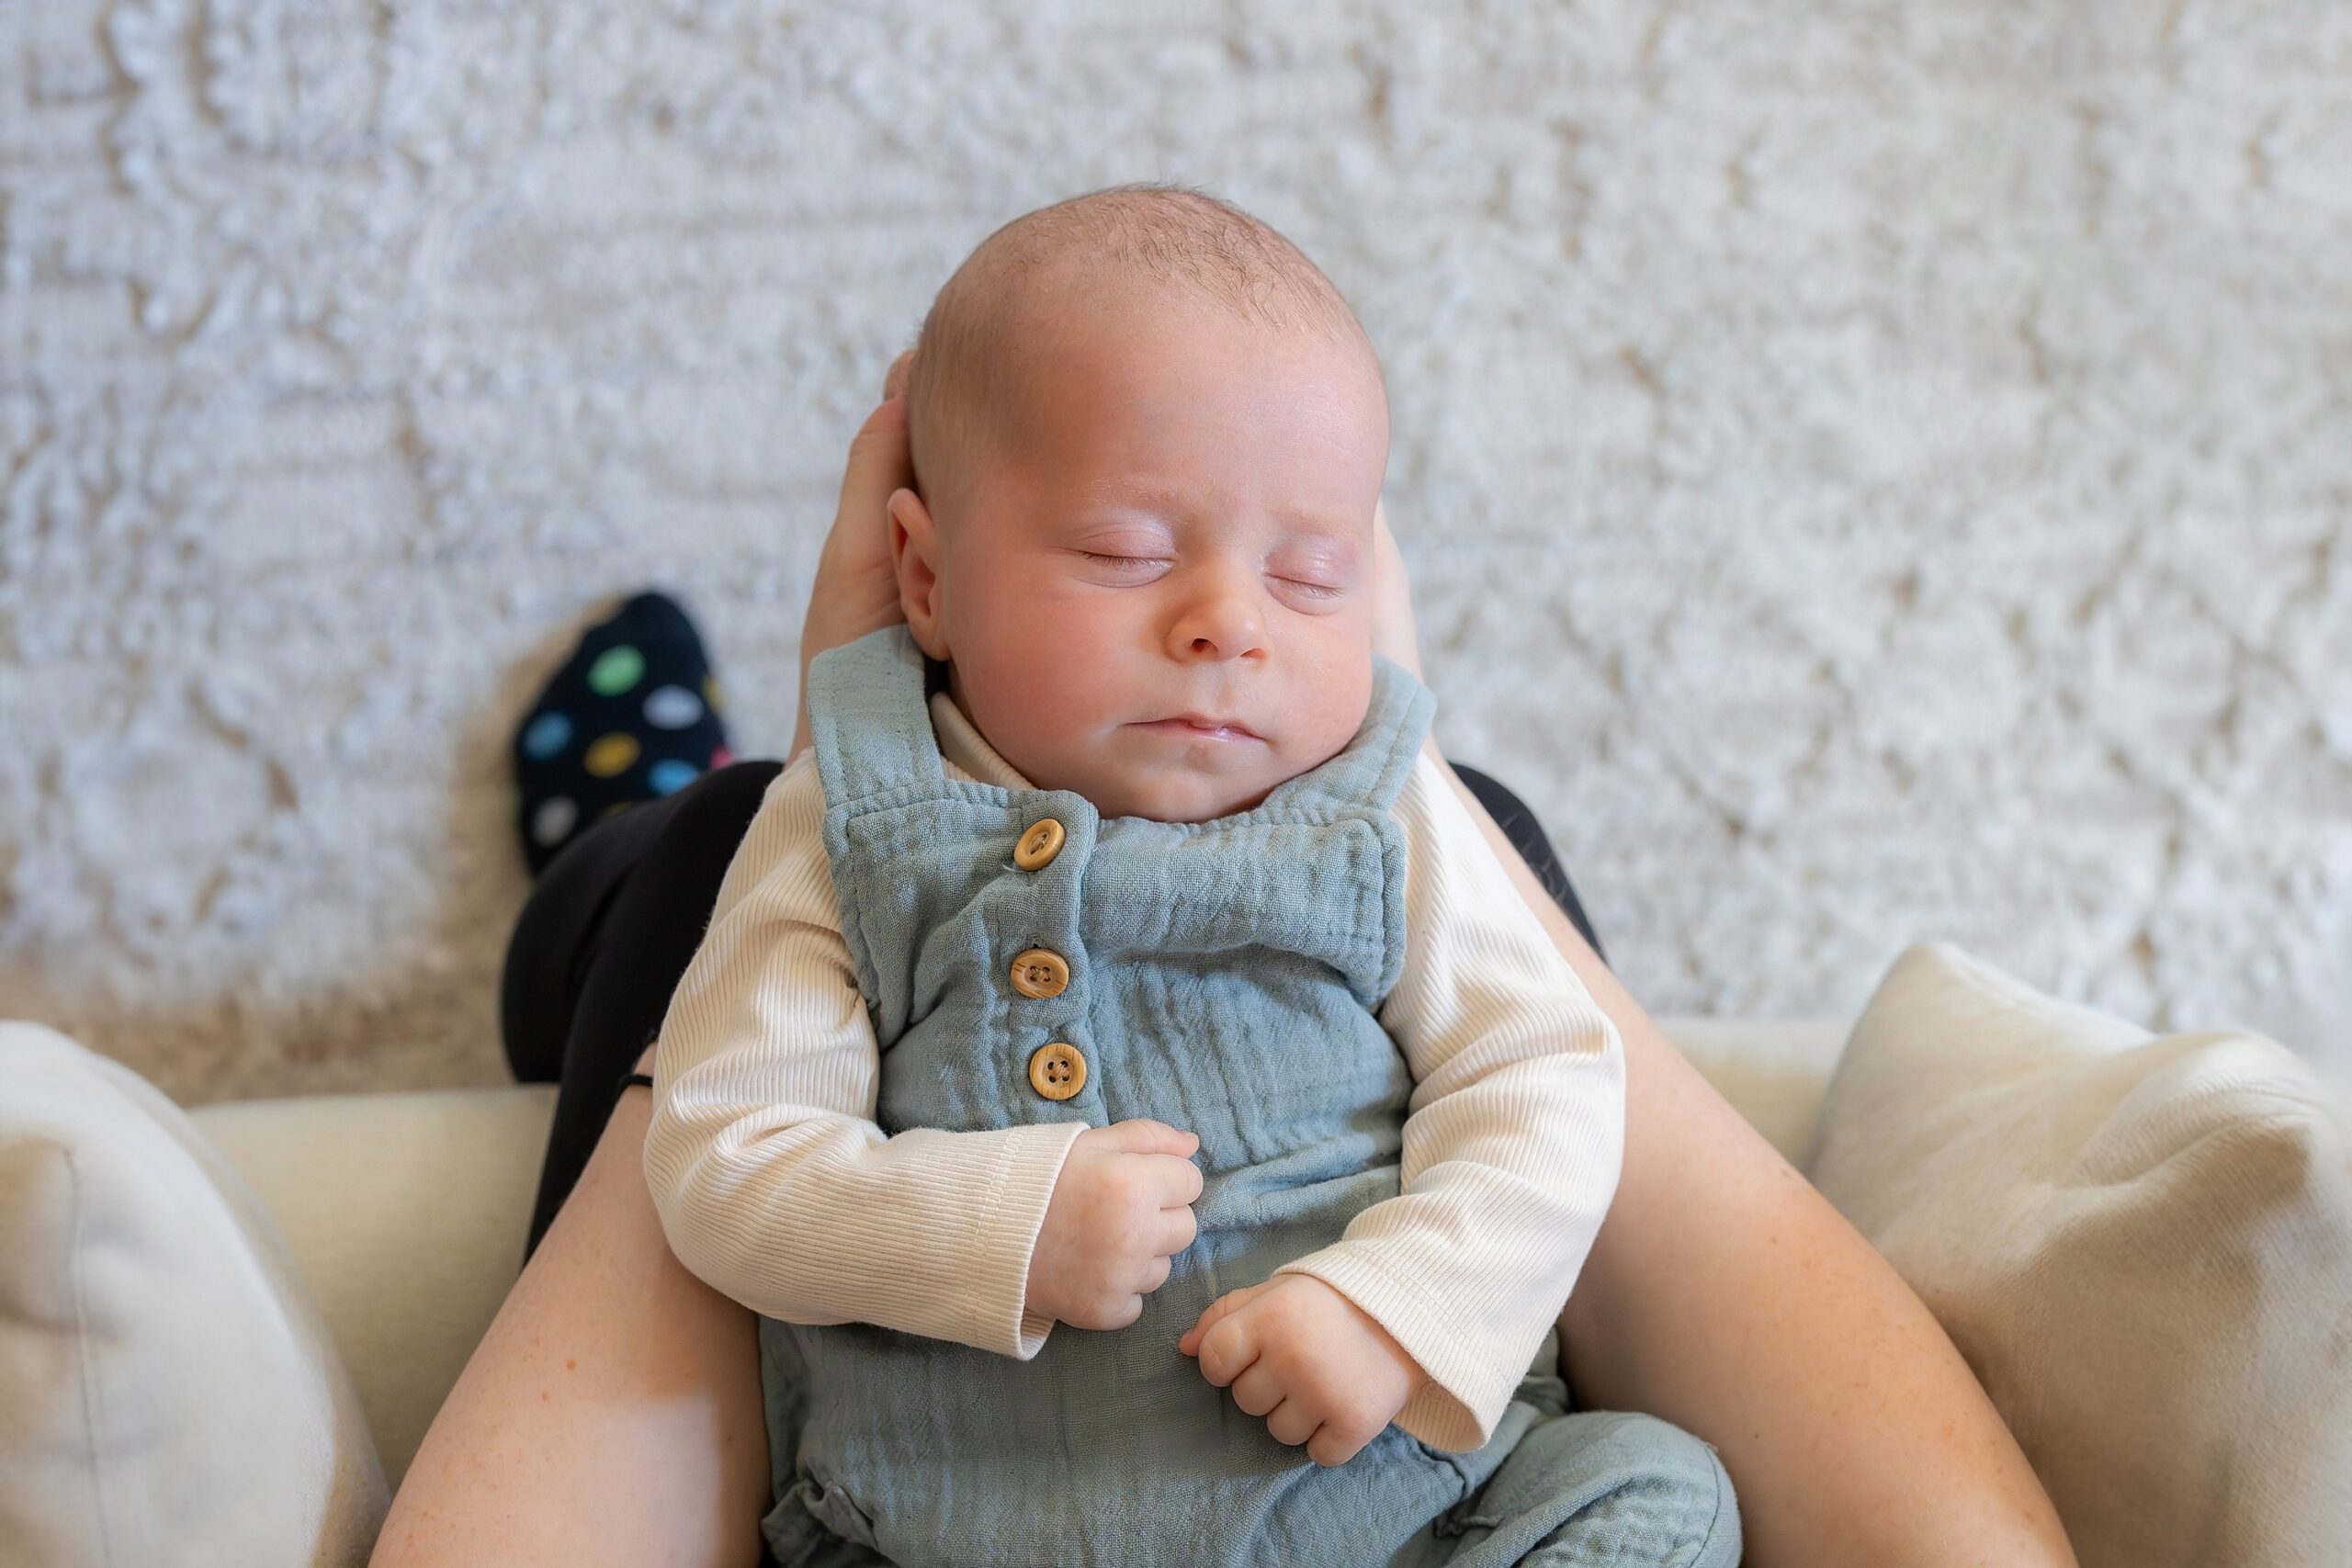 A sleeping infant in a blue onesie resting in an adult's lap against a cushioned background.